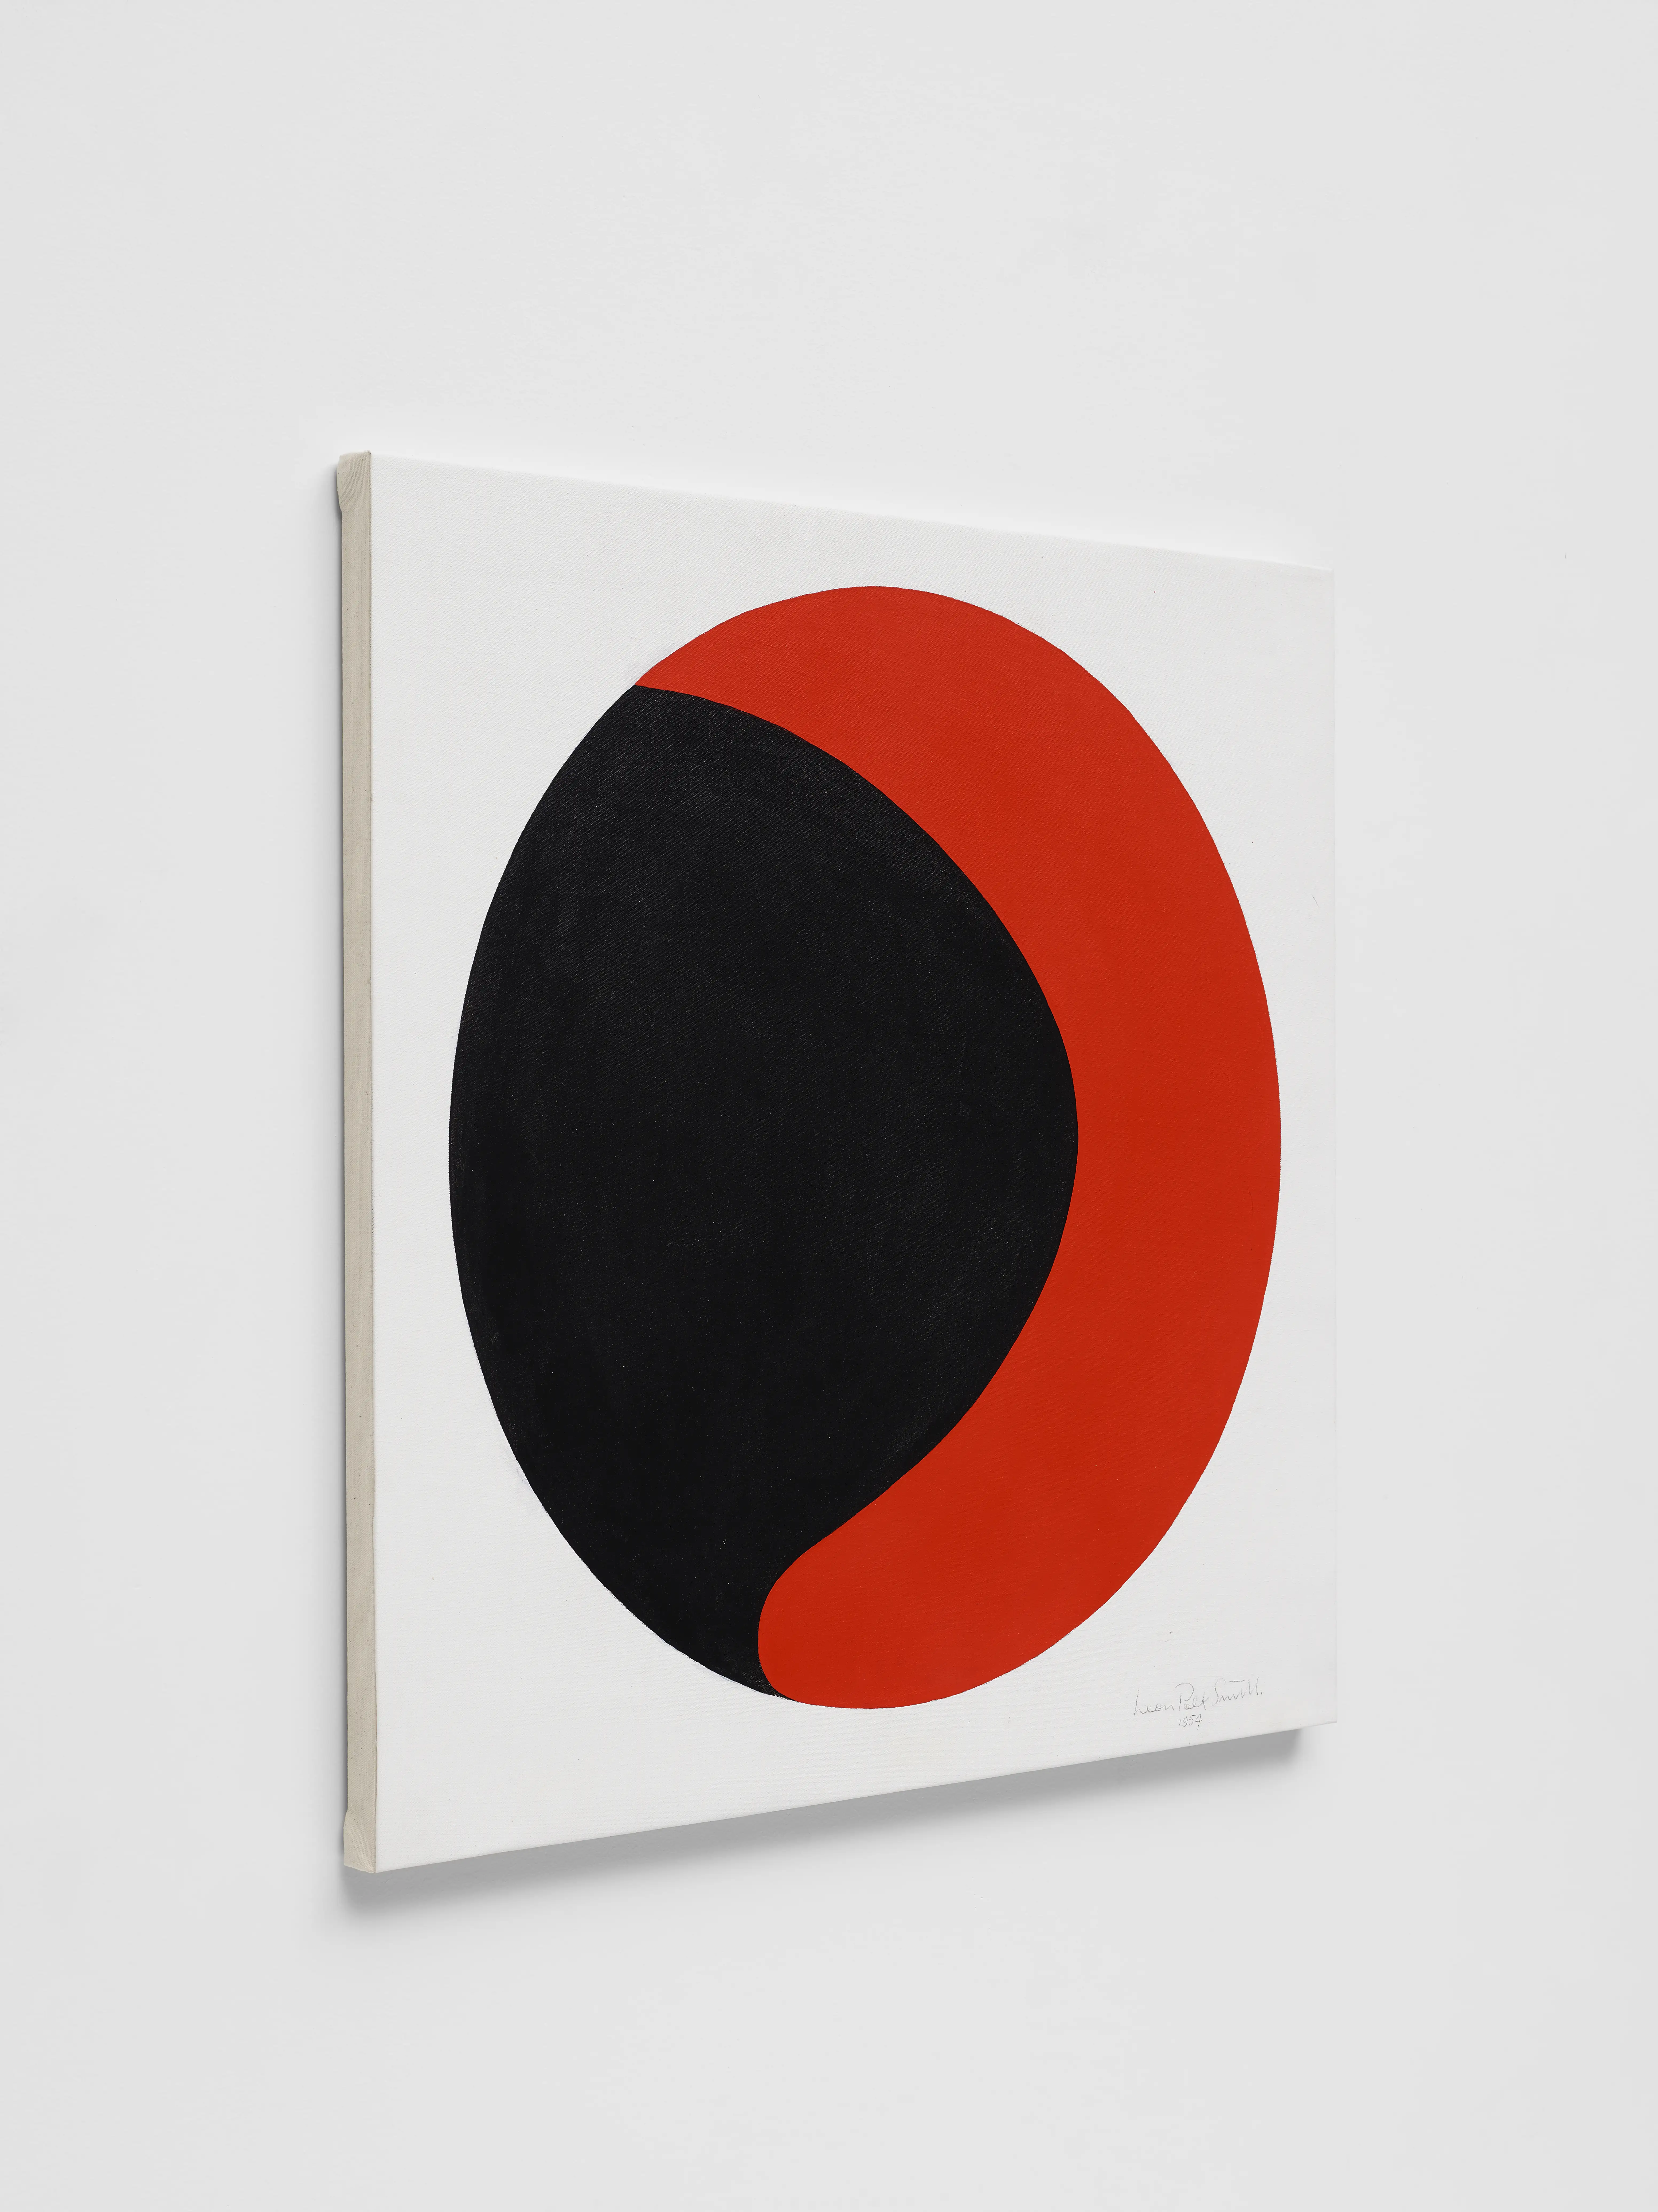 Leon Polk Smith untitled, 1954. Red and Black circle.